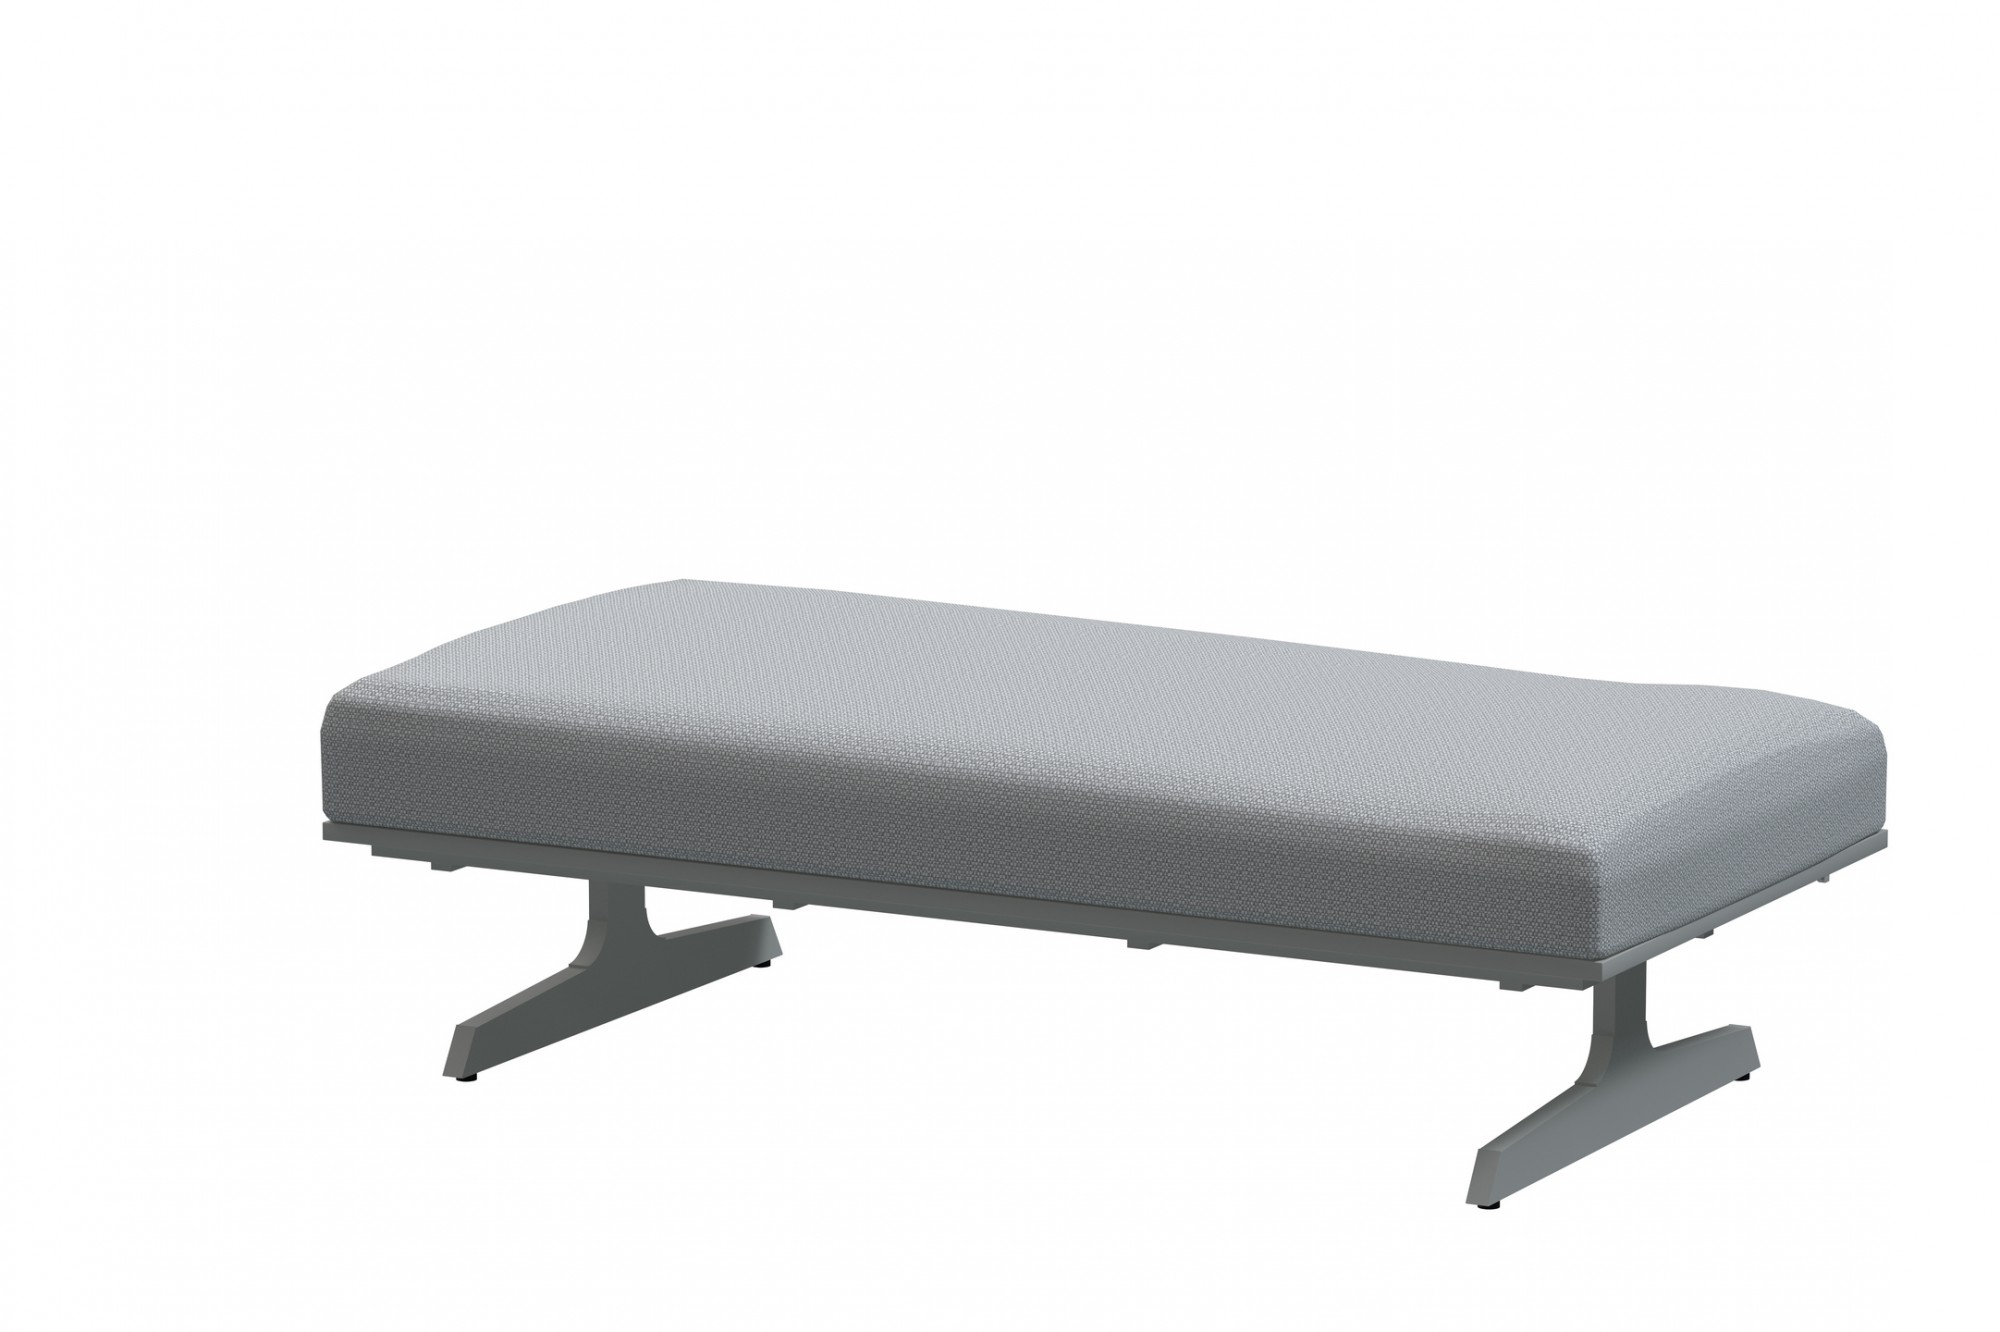 4 Seasons Outdoor Play Chaise Longue 